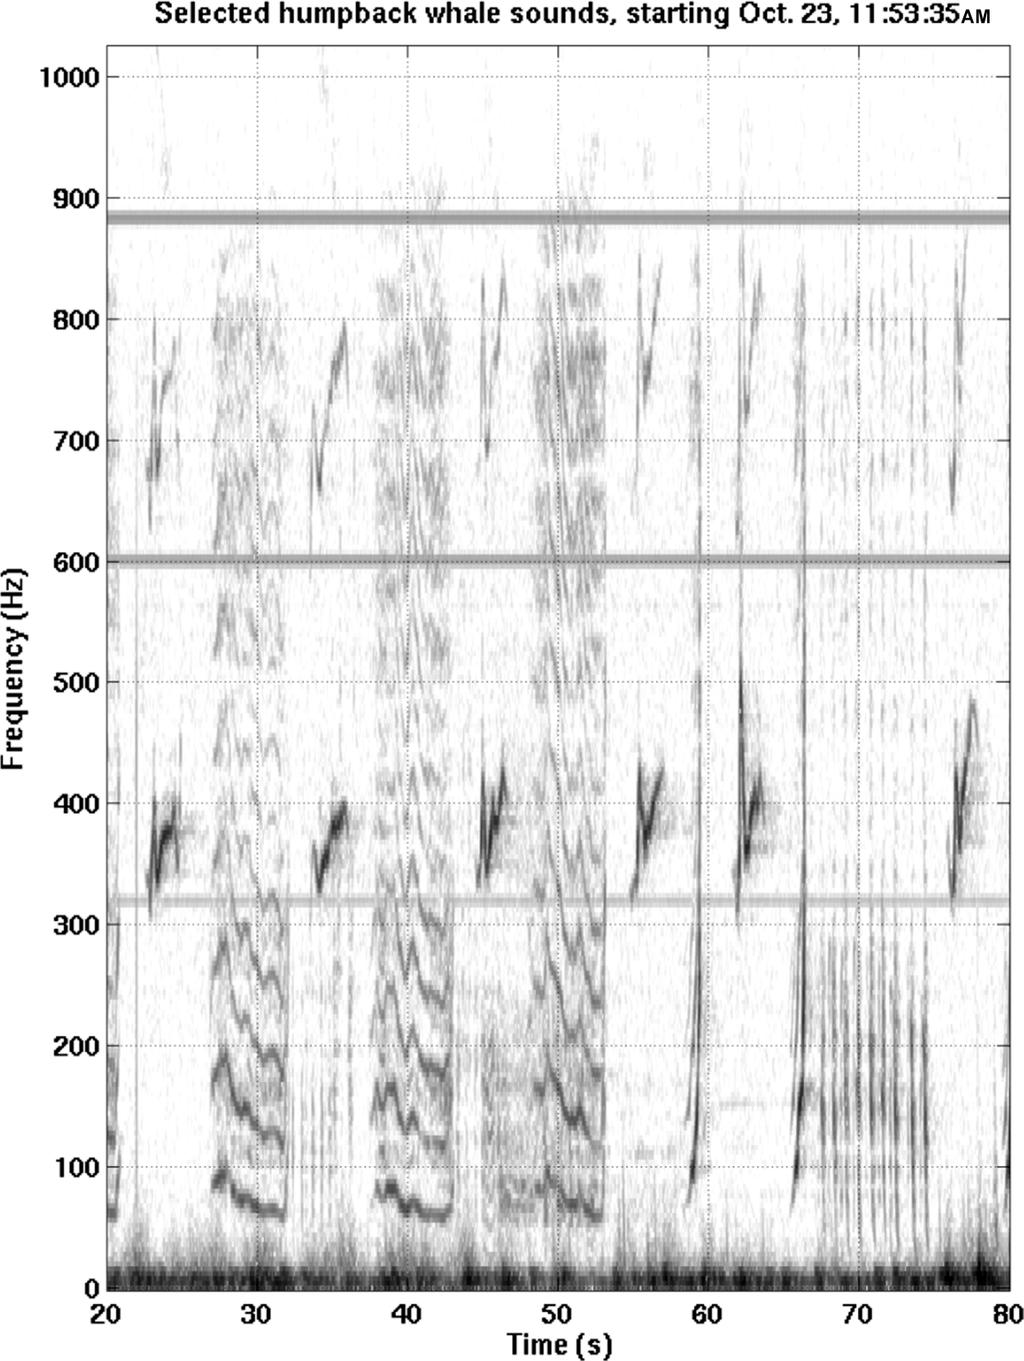 702 IEEE JOURNAL OF OCEANIC ENGINEERING, VOL. 31, NO. 3, JULY 2006 Fig. 4. Spectrogram of humpback whale song used in matched-field synchronization and tracking analysis.